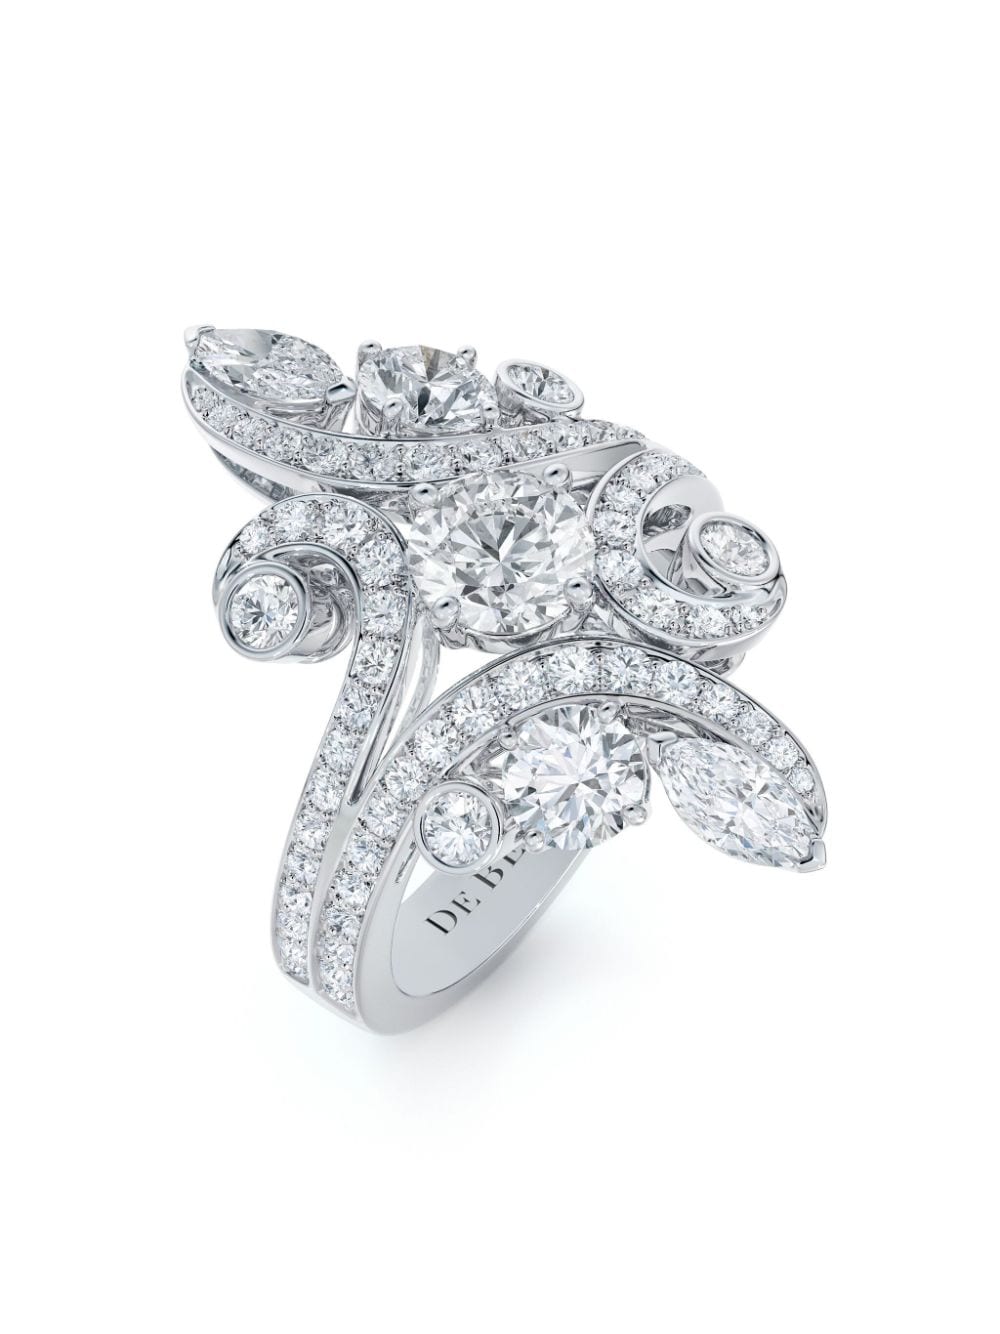 Image 2 of De Beers Jewellers 18kt white gold Adonis Rose diamond ring